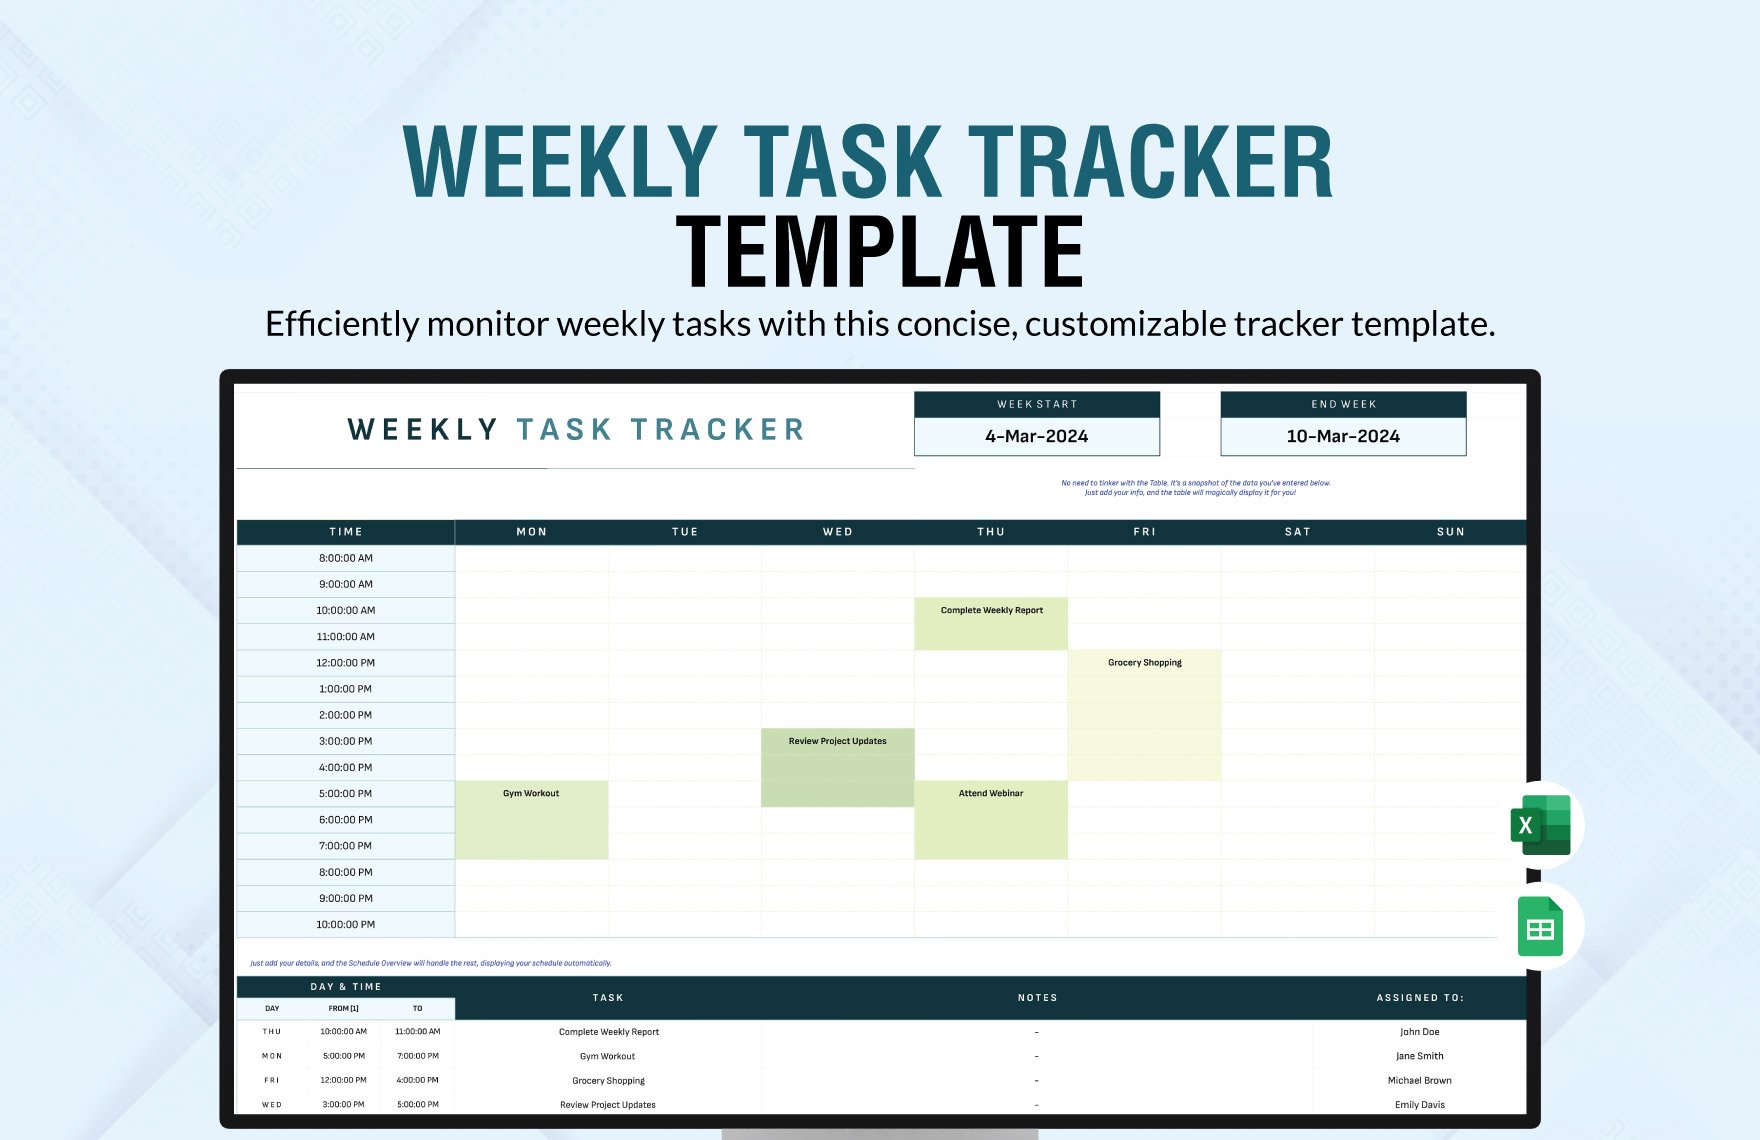 Weekly Task Tracker Template in Excel, Google Sheets